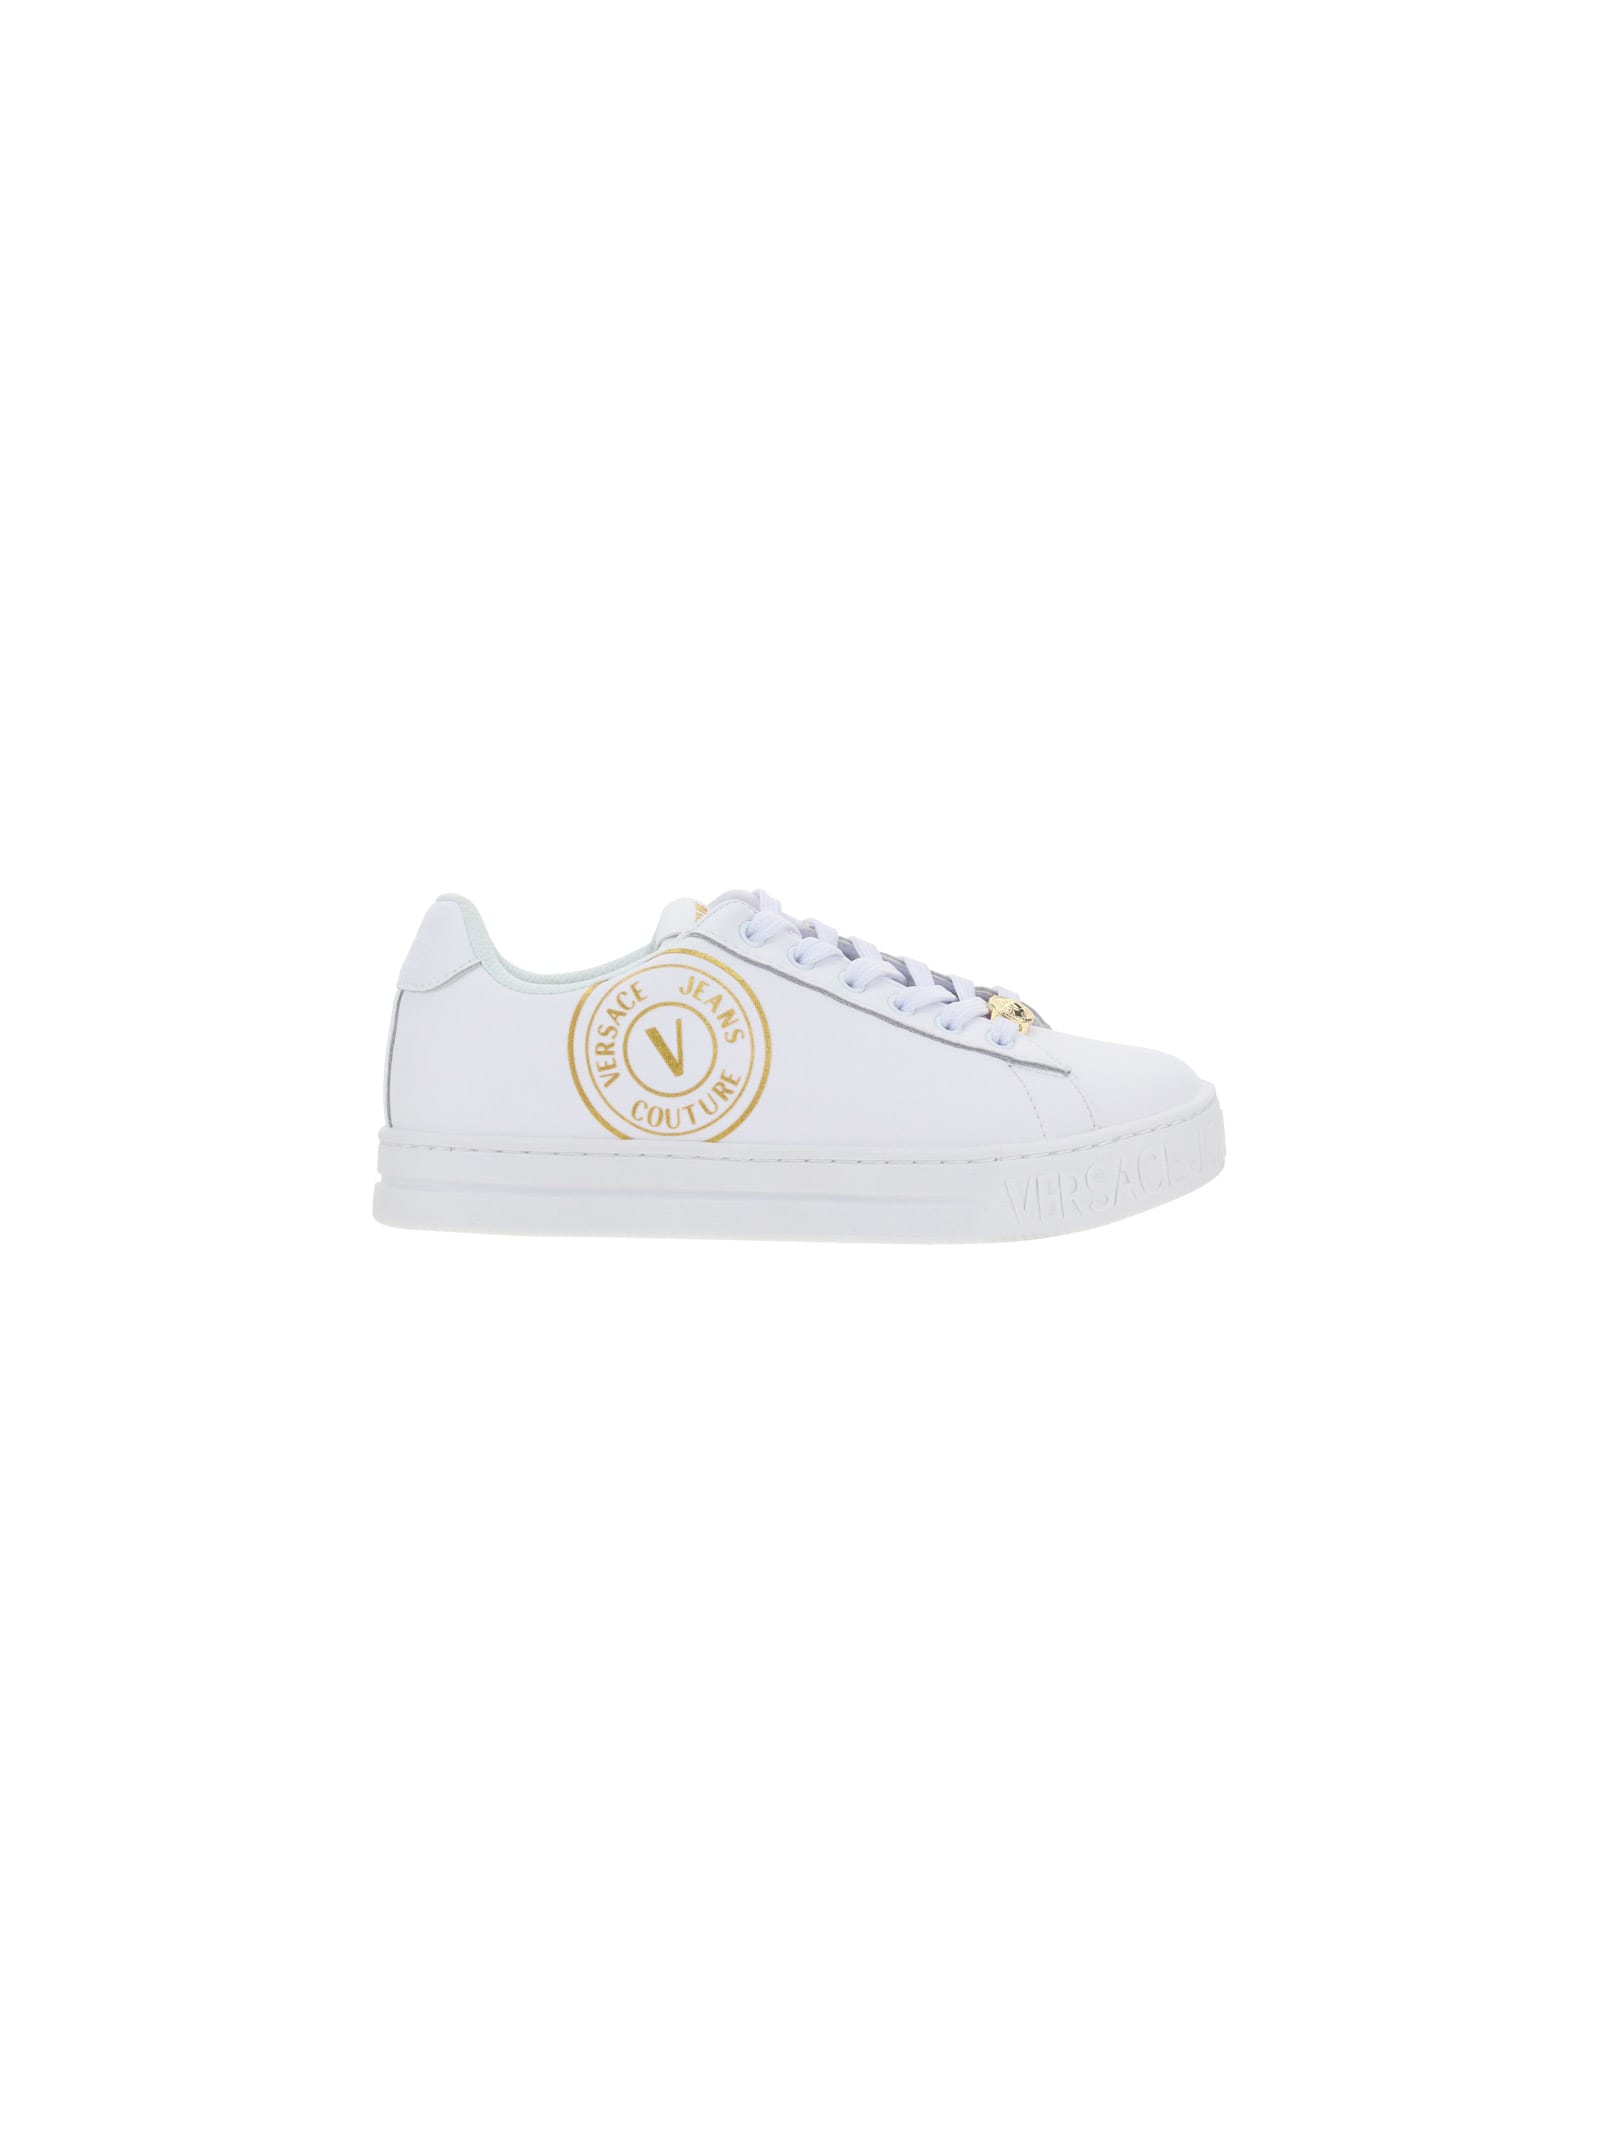 Versace Jeans Couture V-emblem Sneakers